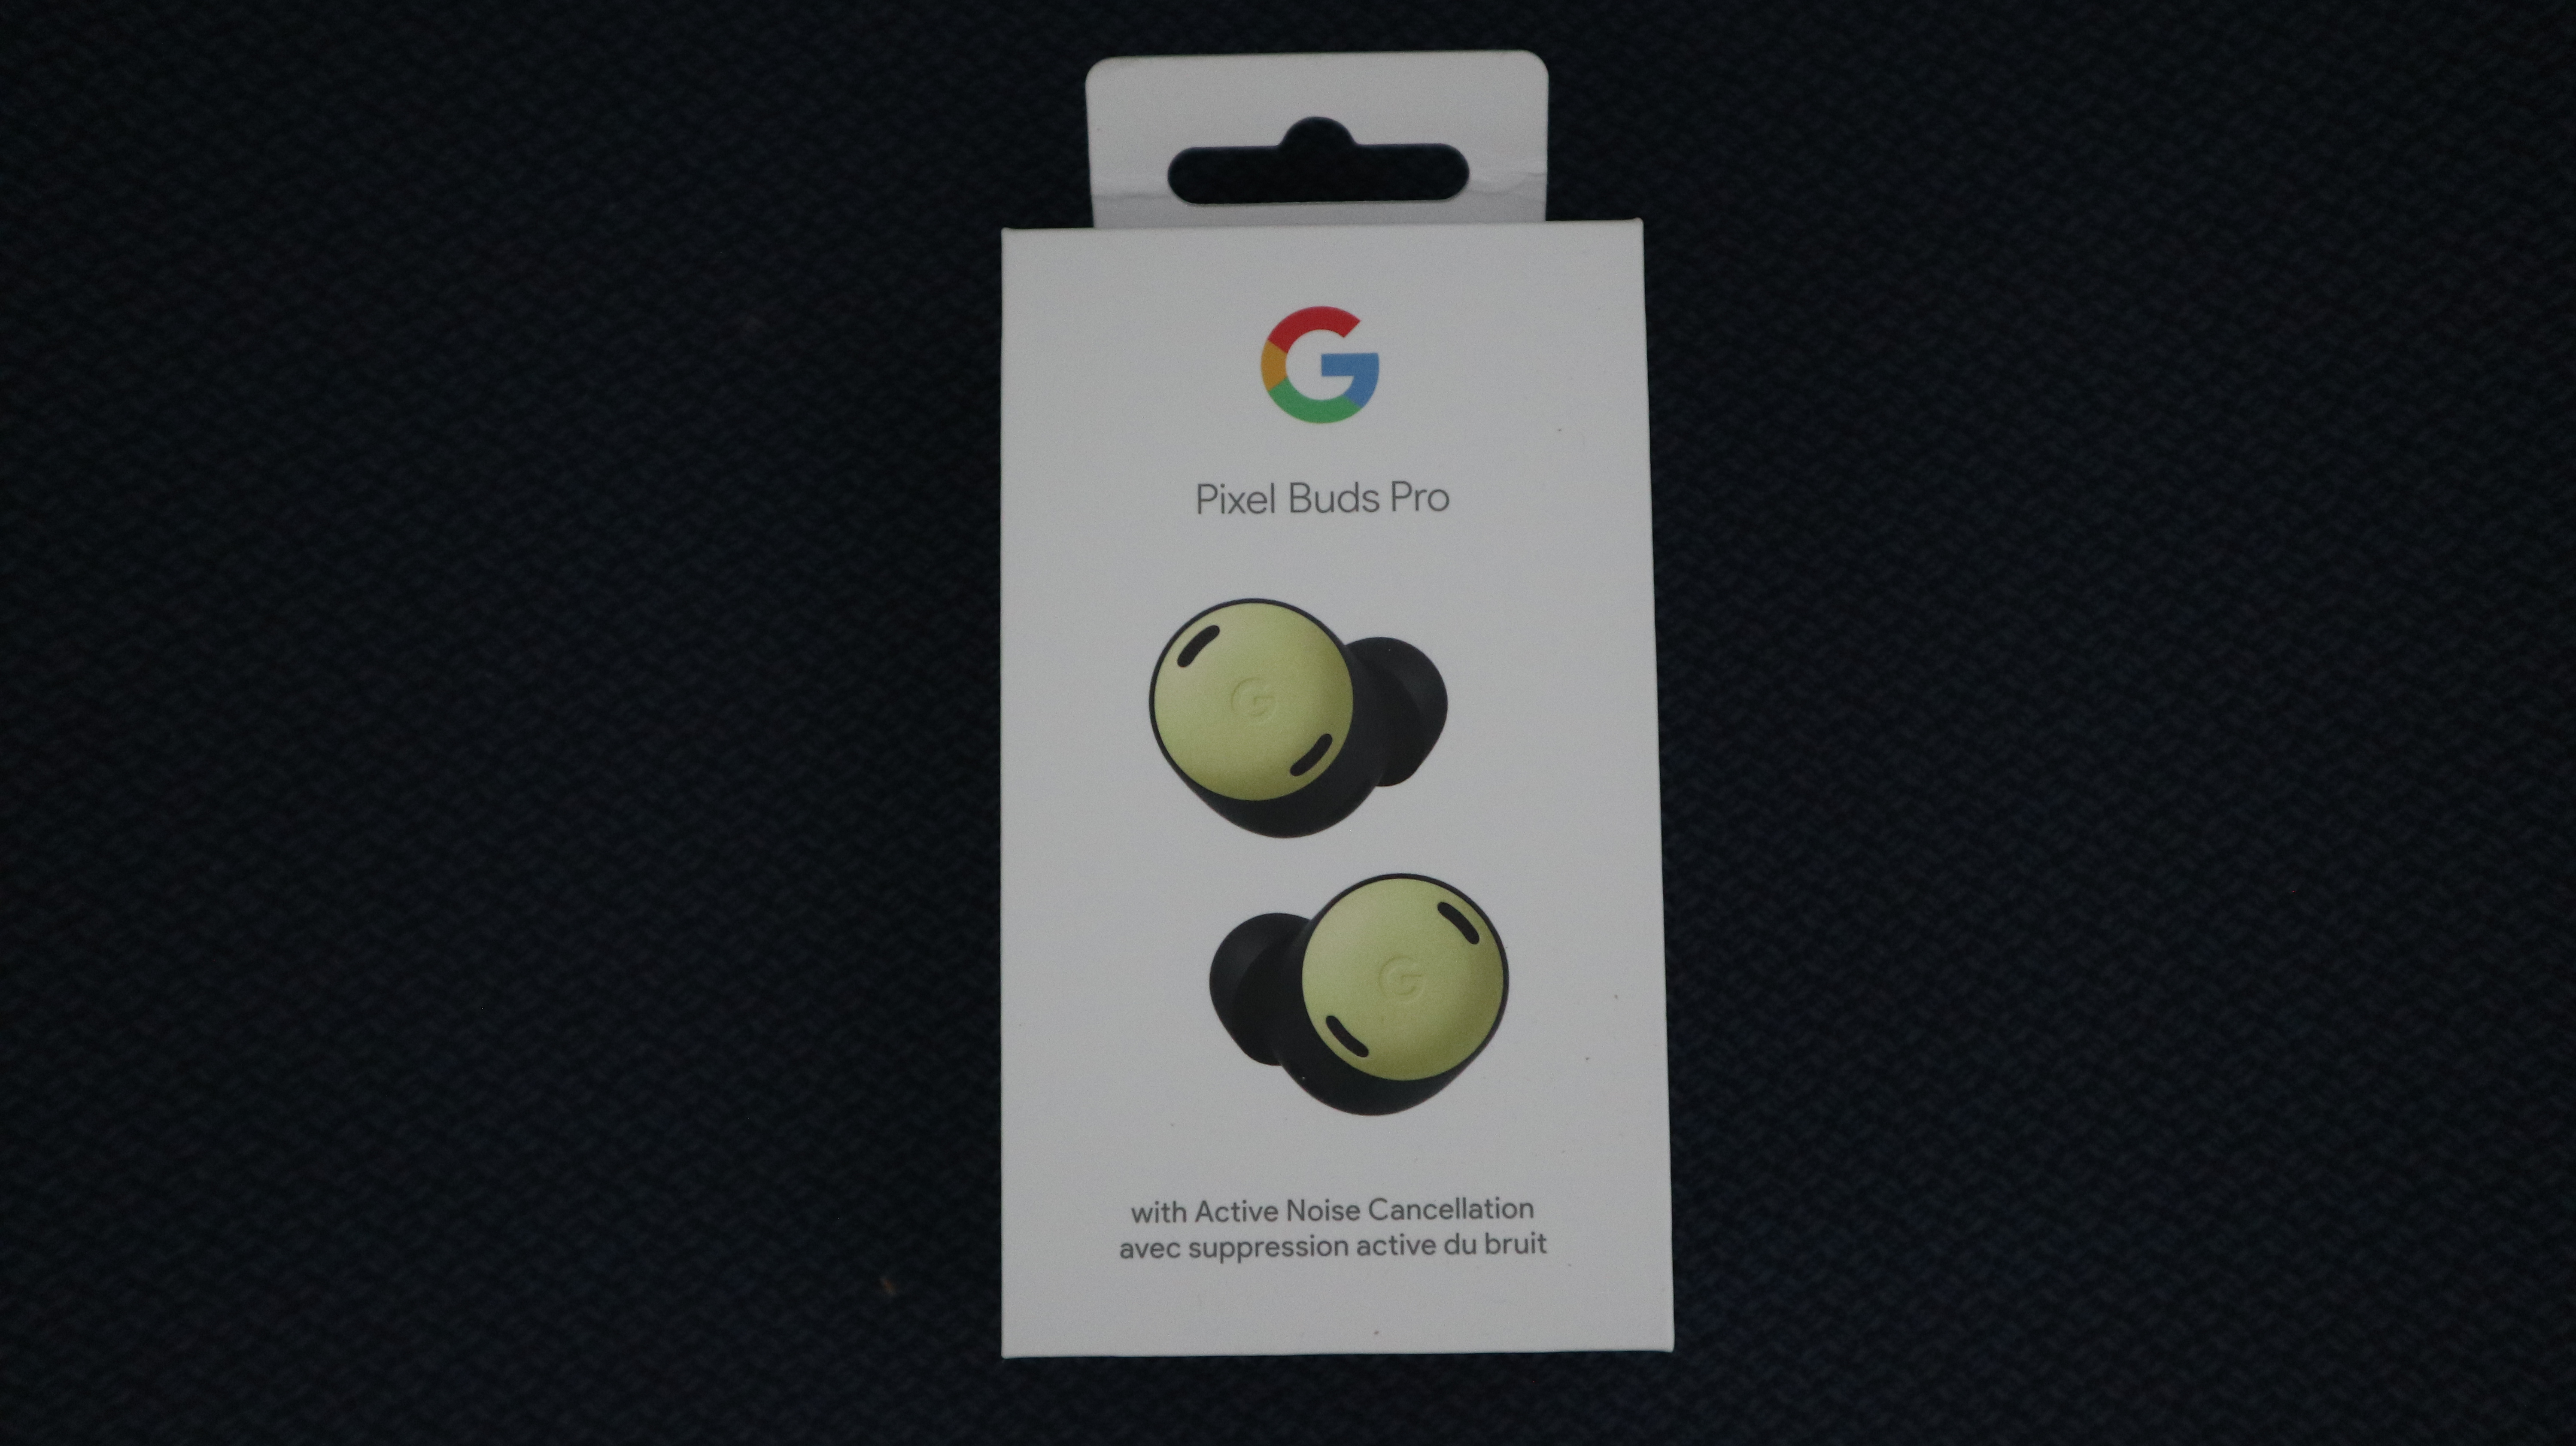 Earbud review: Google Pixel Buds Pro fall well short of their $